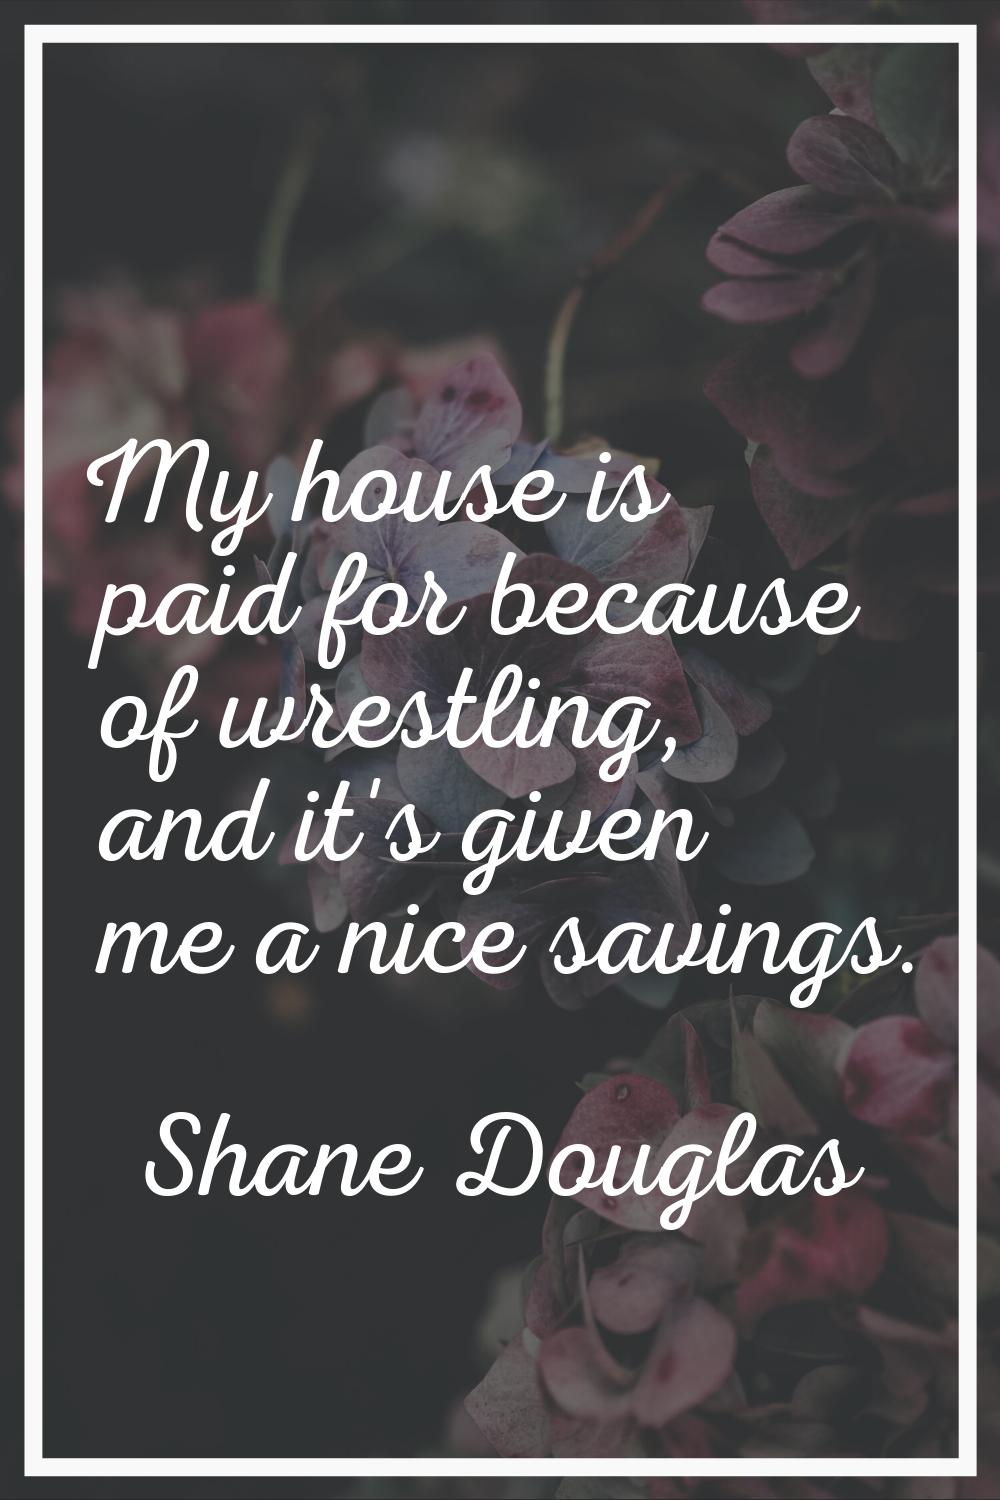 My house is paid for because of wrestling, and it's given me a nice savings.